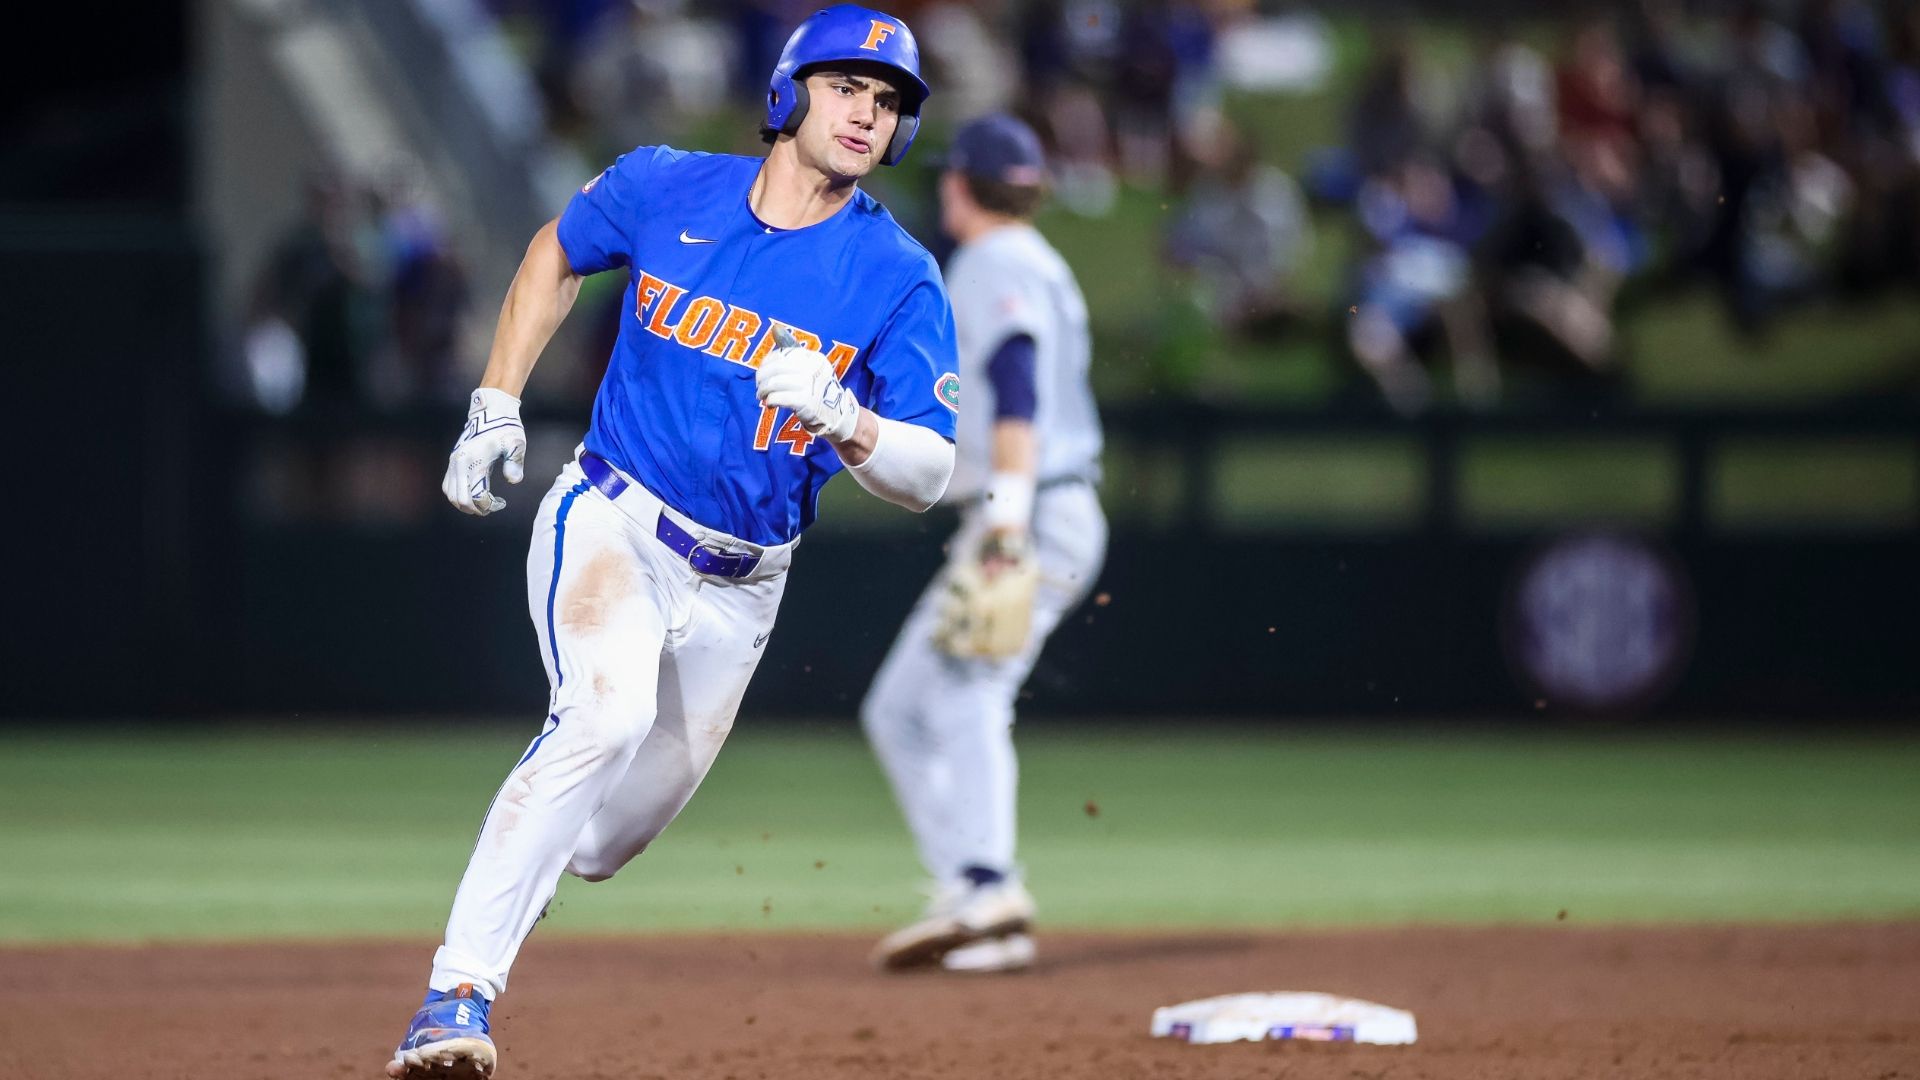 UF's Caglianone shows rare ability on mound, at plate